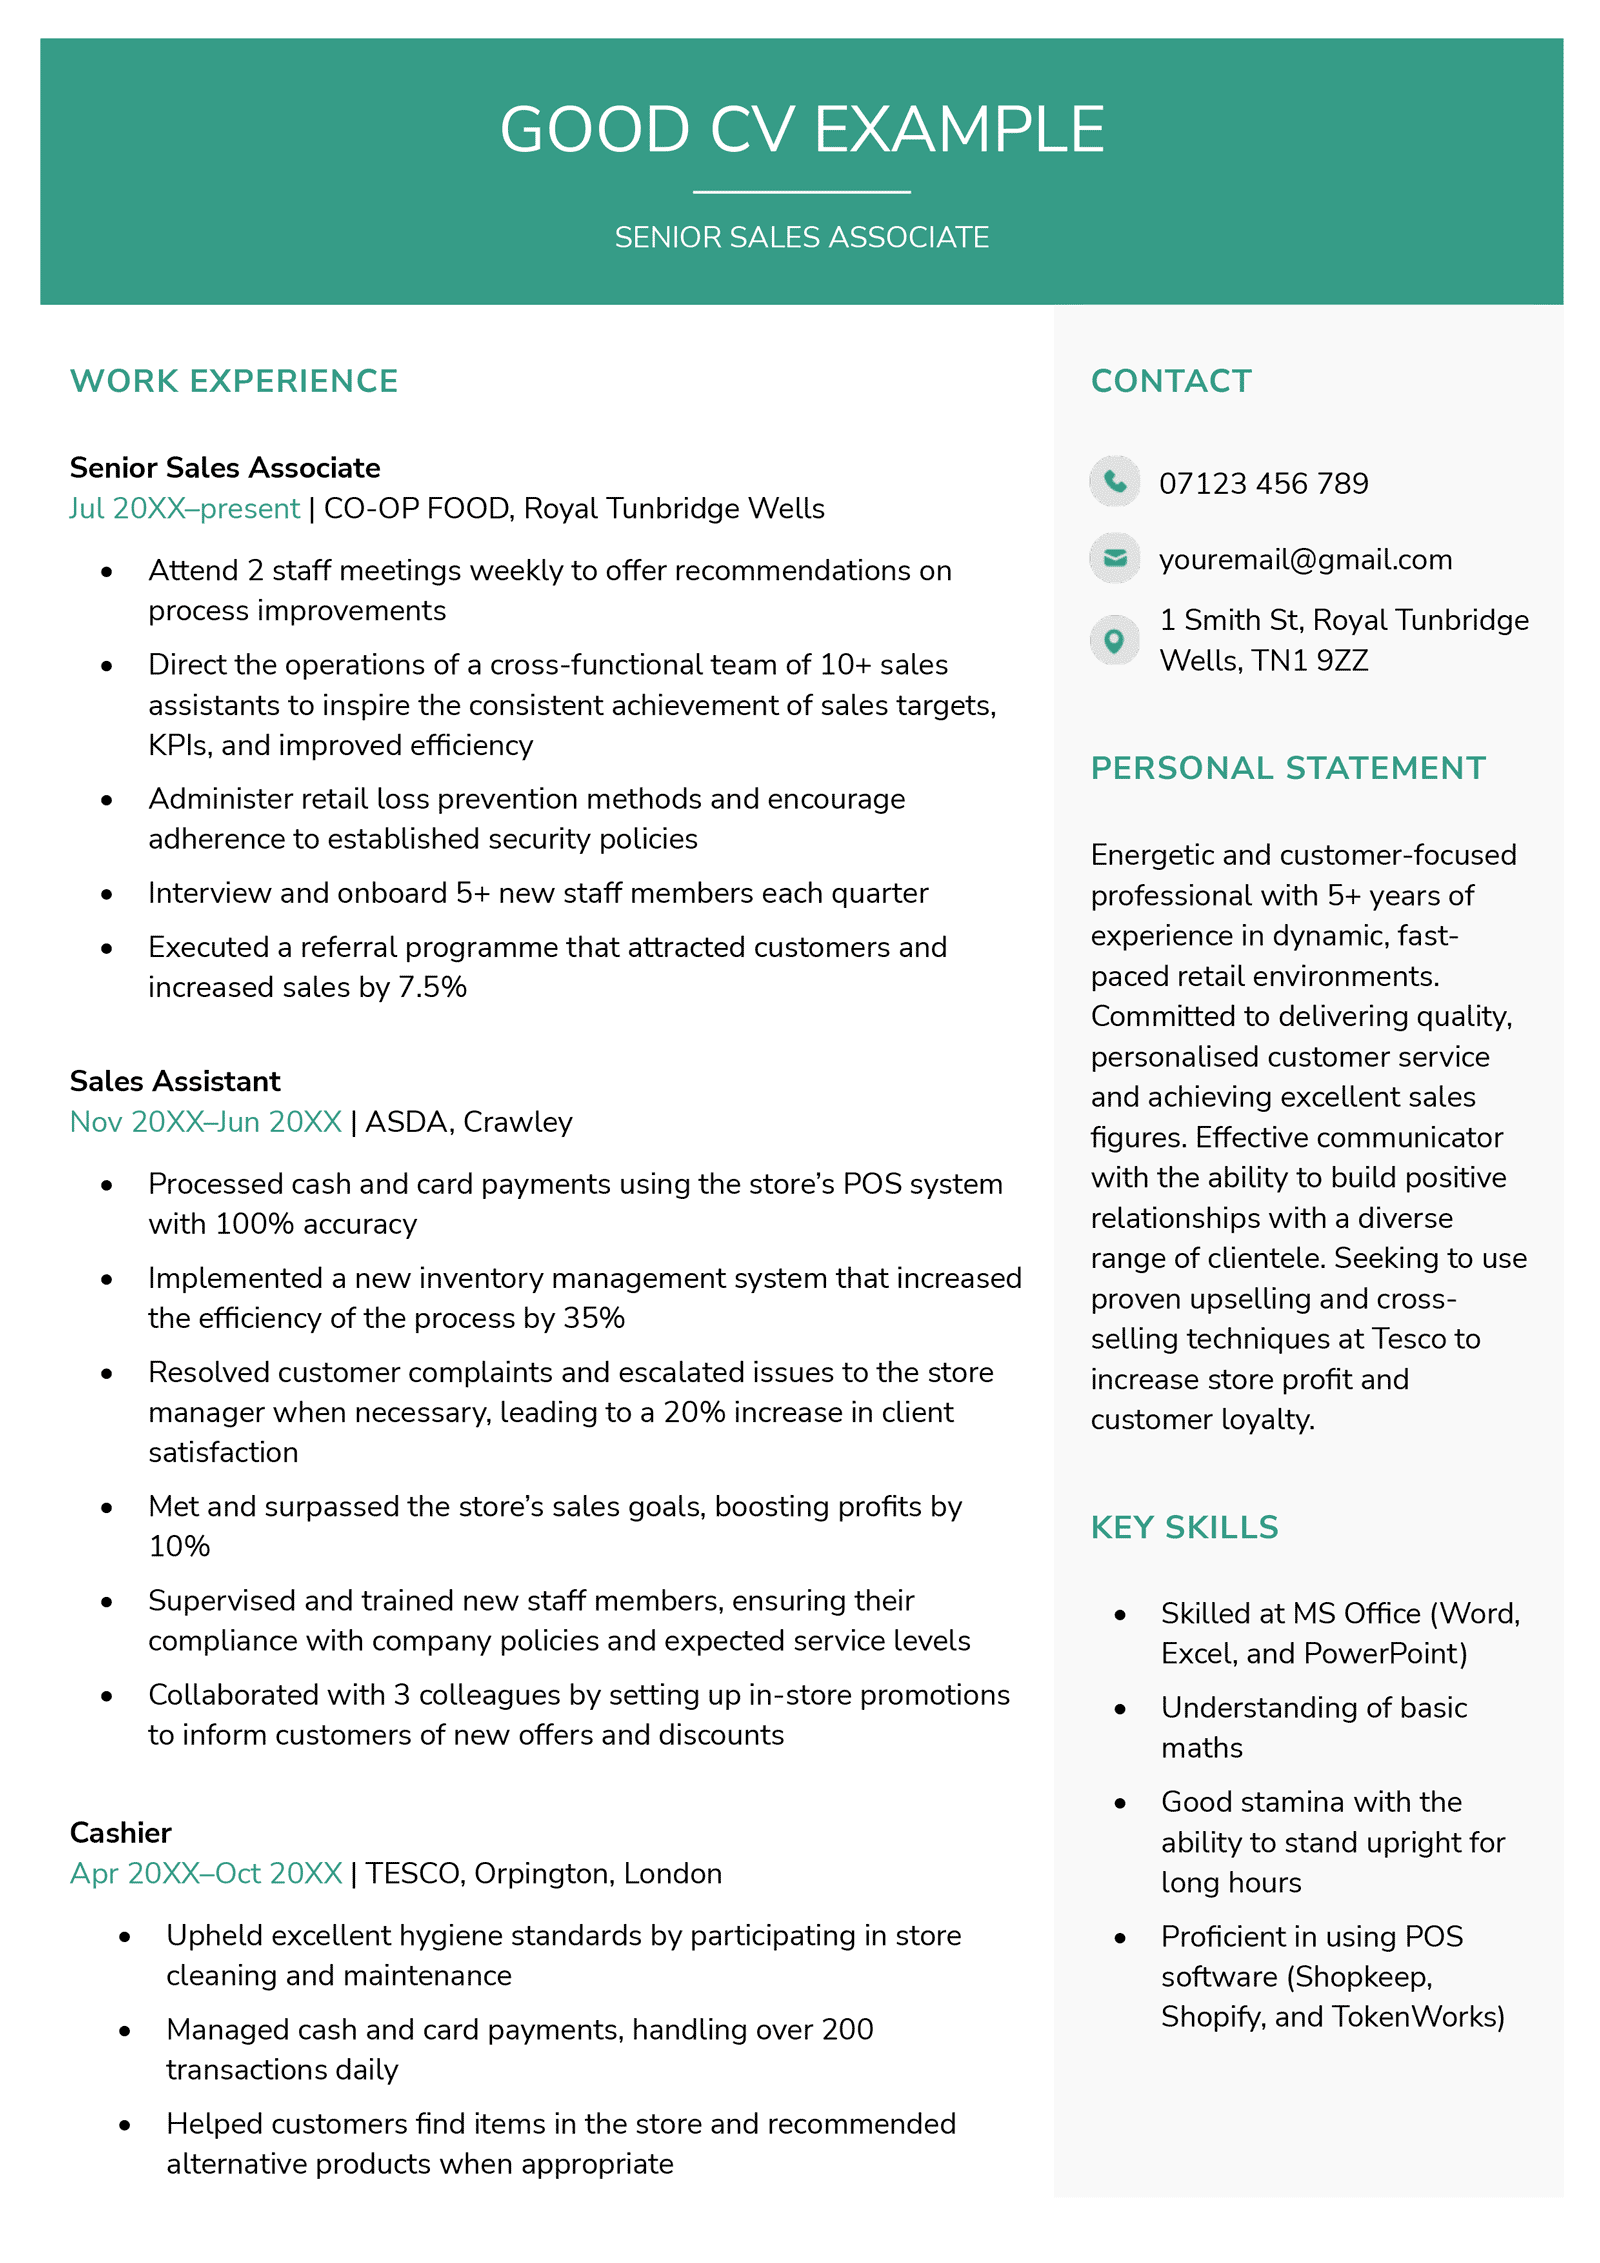 A CV written by a candidate after they've submitted a letter of resignation. The letter uses a green colour scheme and eye-catching two-column layout.